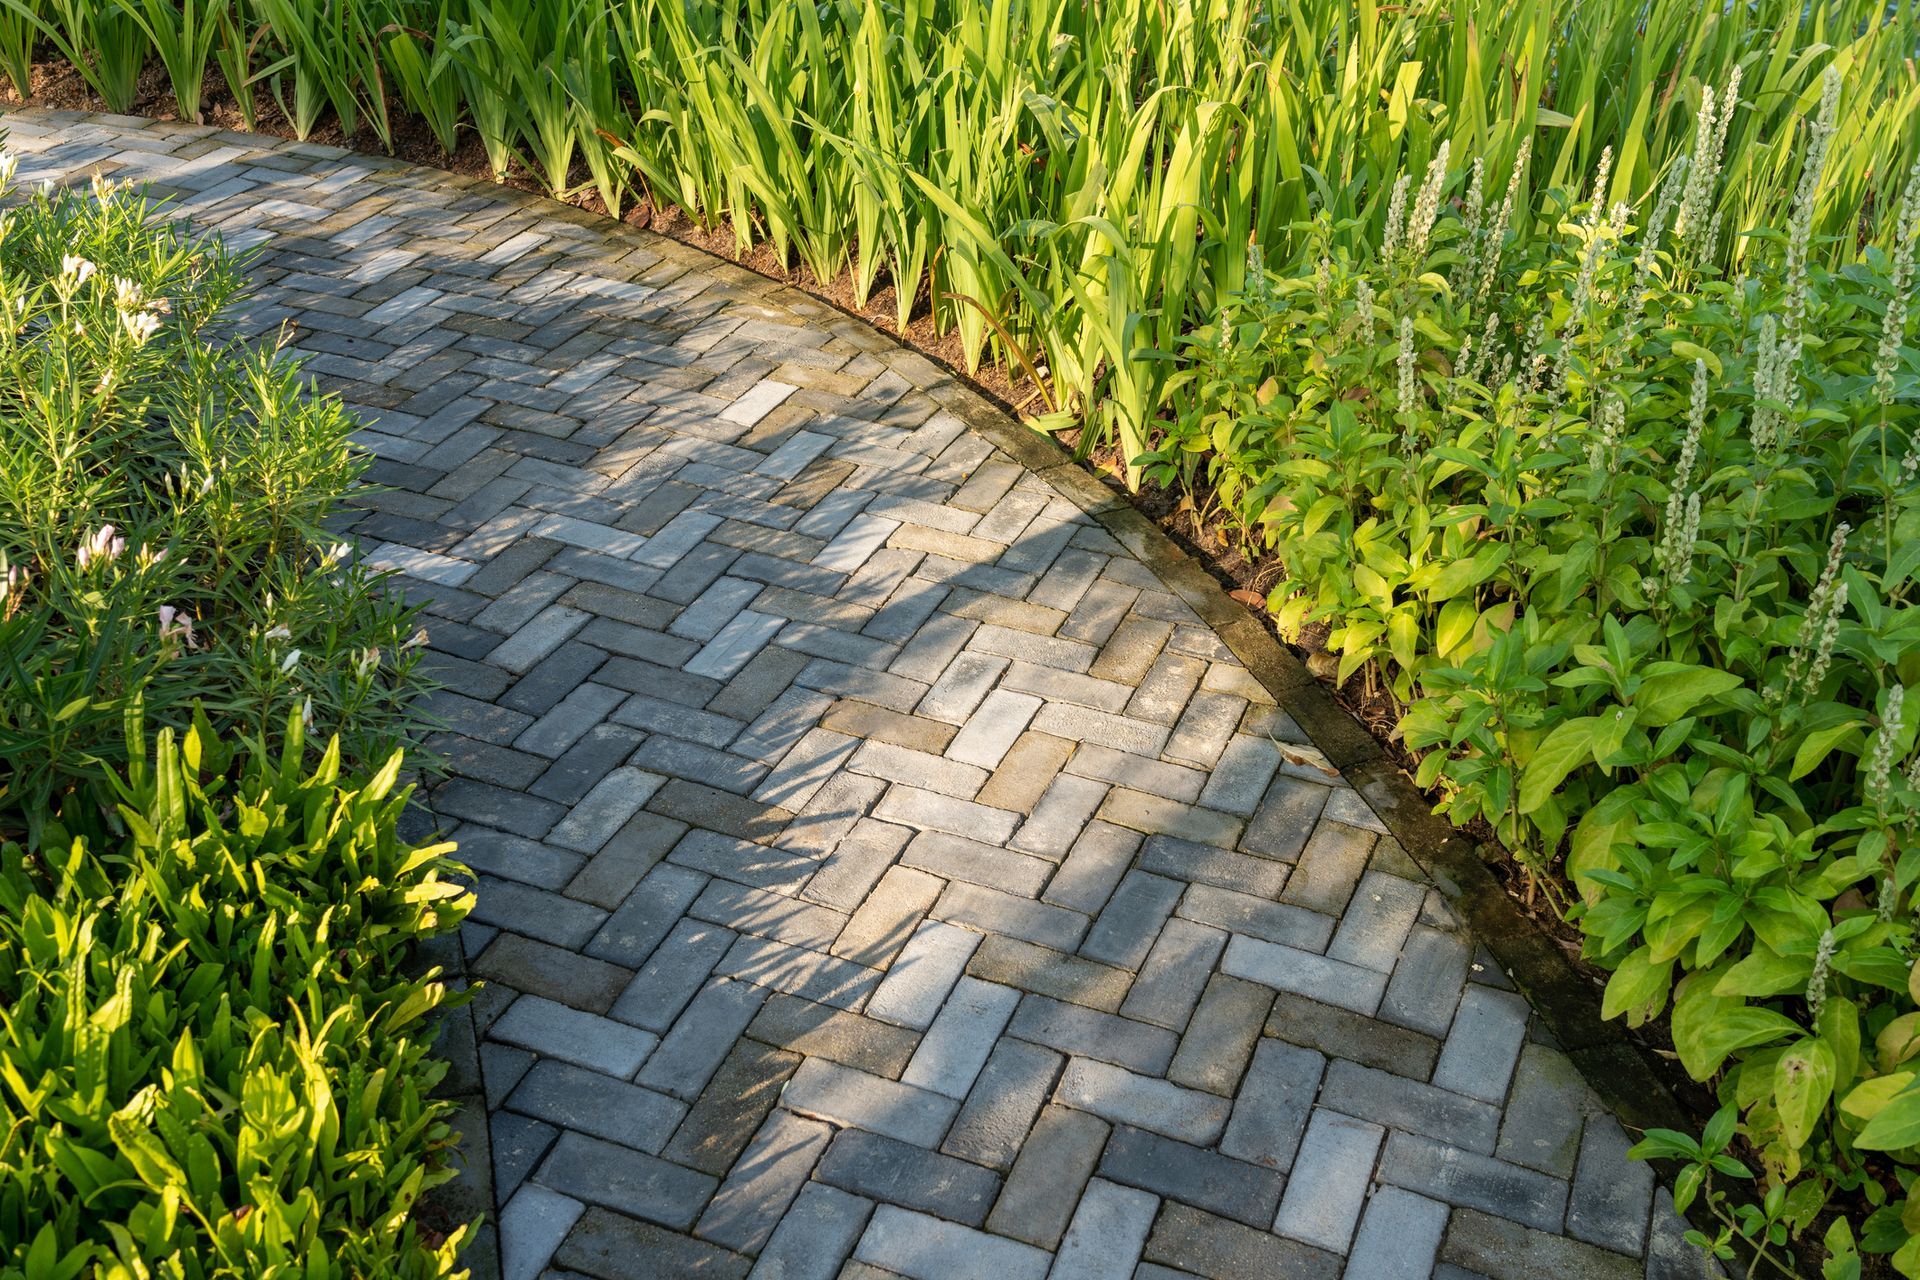 A Brick Walkway in A Garden Surrounded by Grass and Bushes - Mingo, IA - Karns Concrete LLC